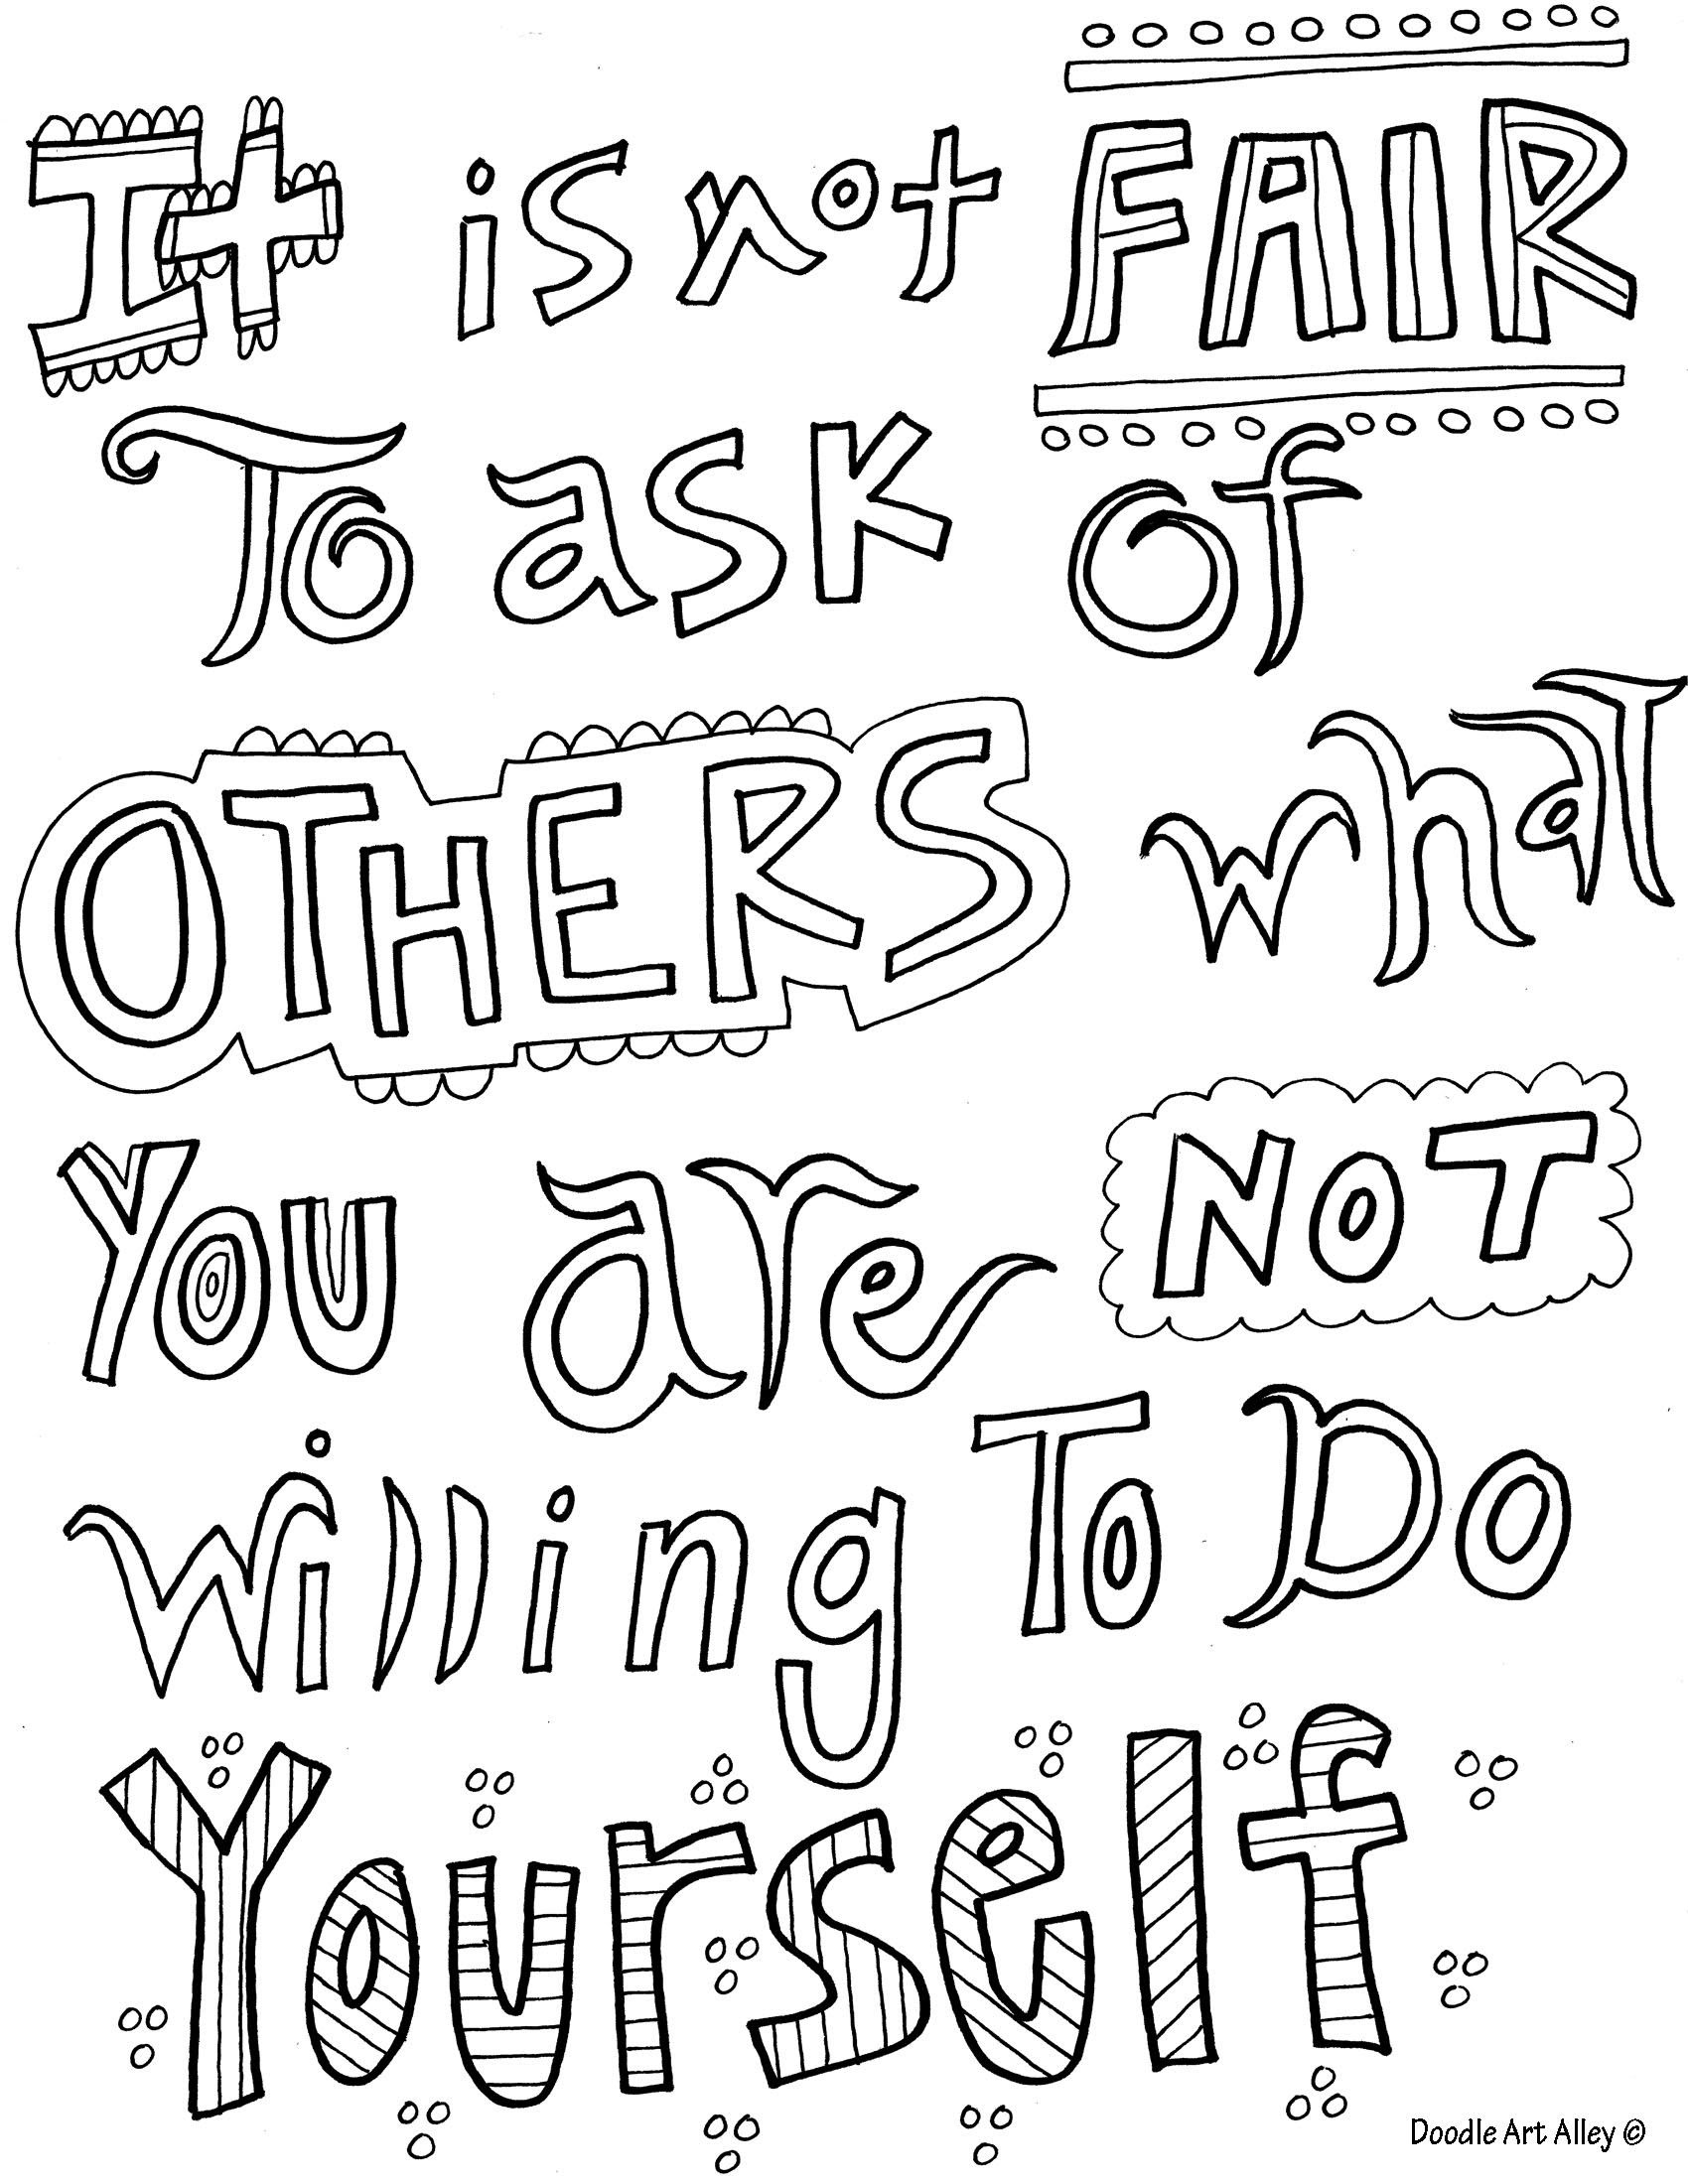 Download Inspirational Quotes Coloring Pages. QuotesGram